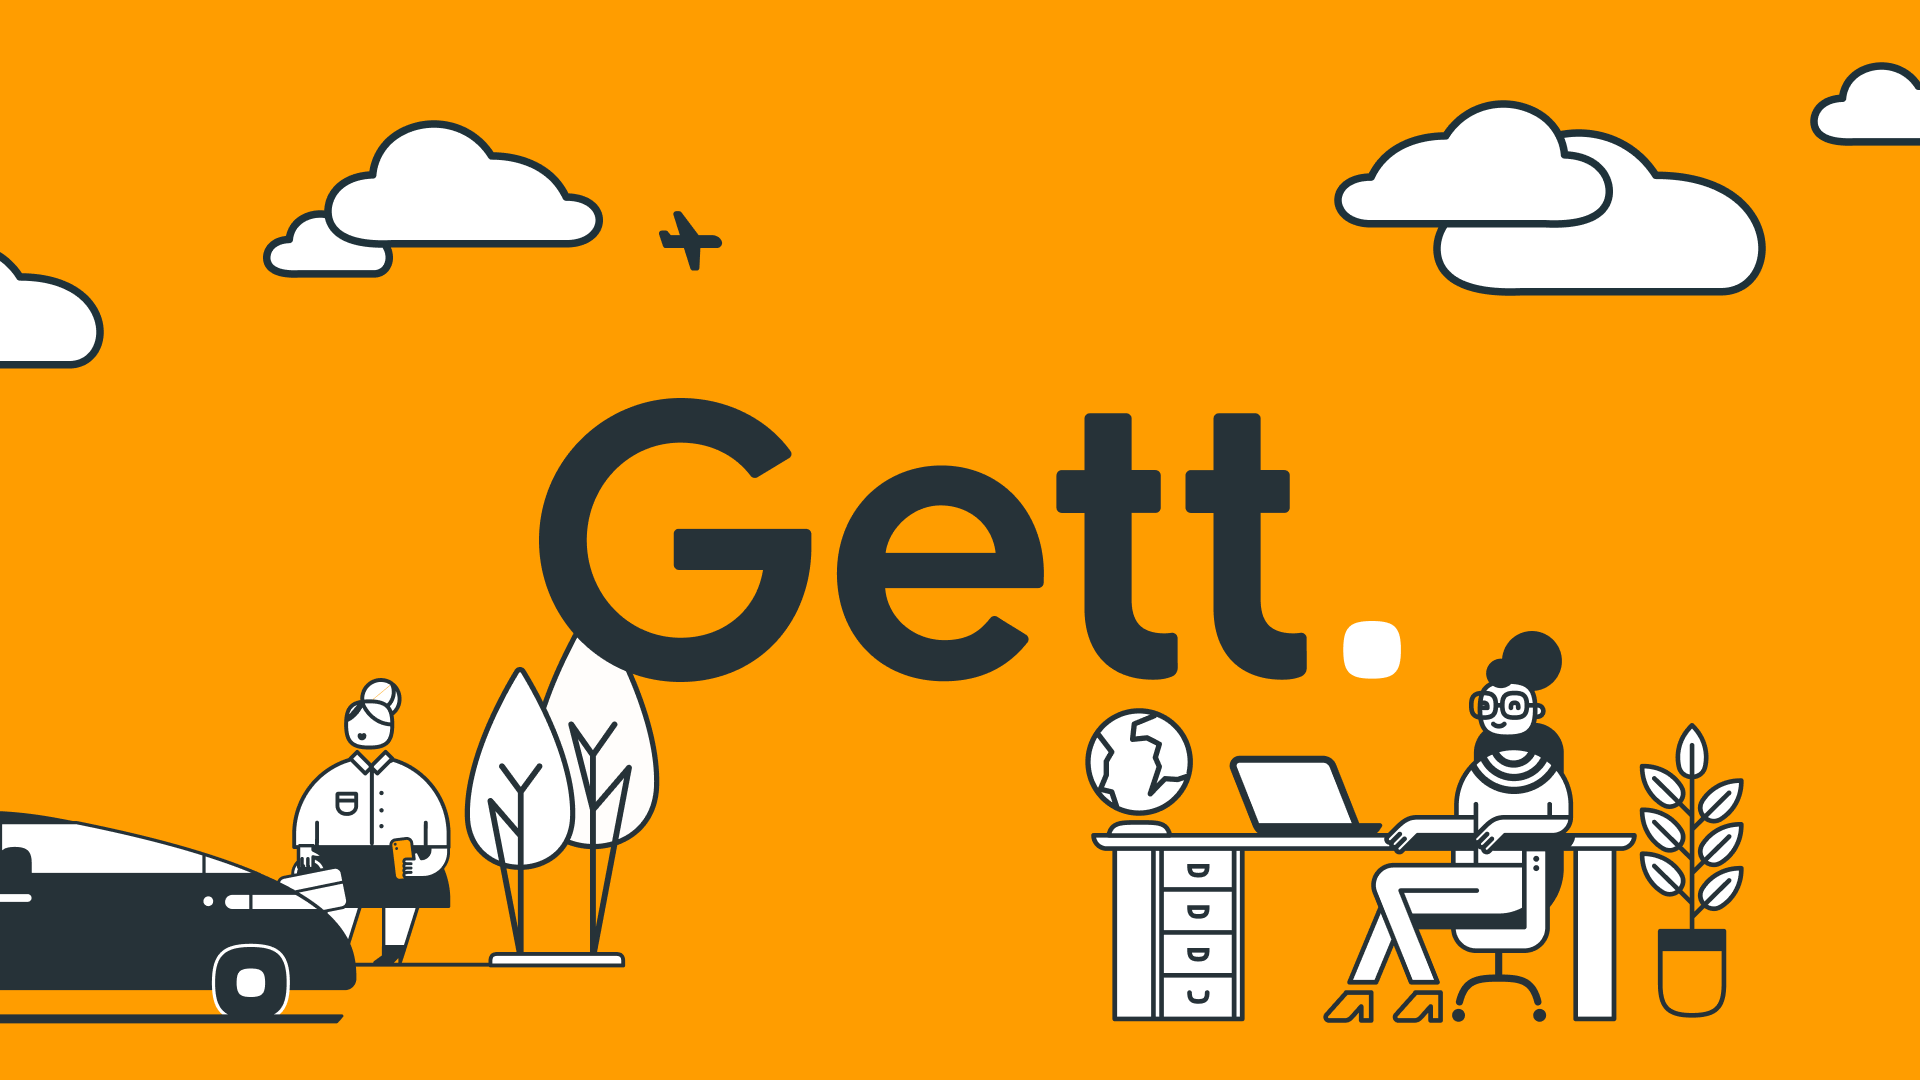 Gett - Legacy project support for an international taxi ordering service